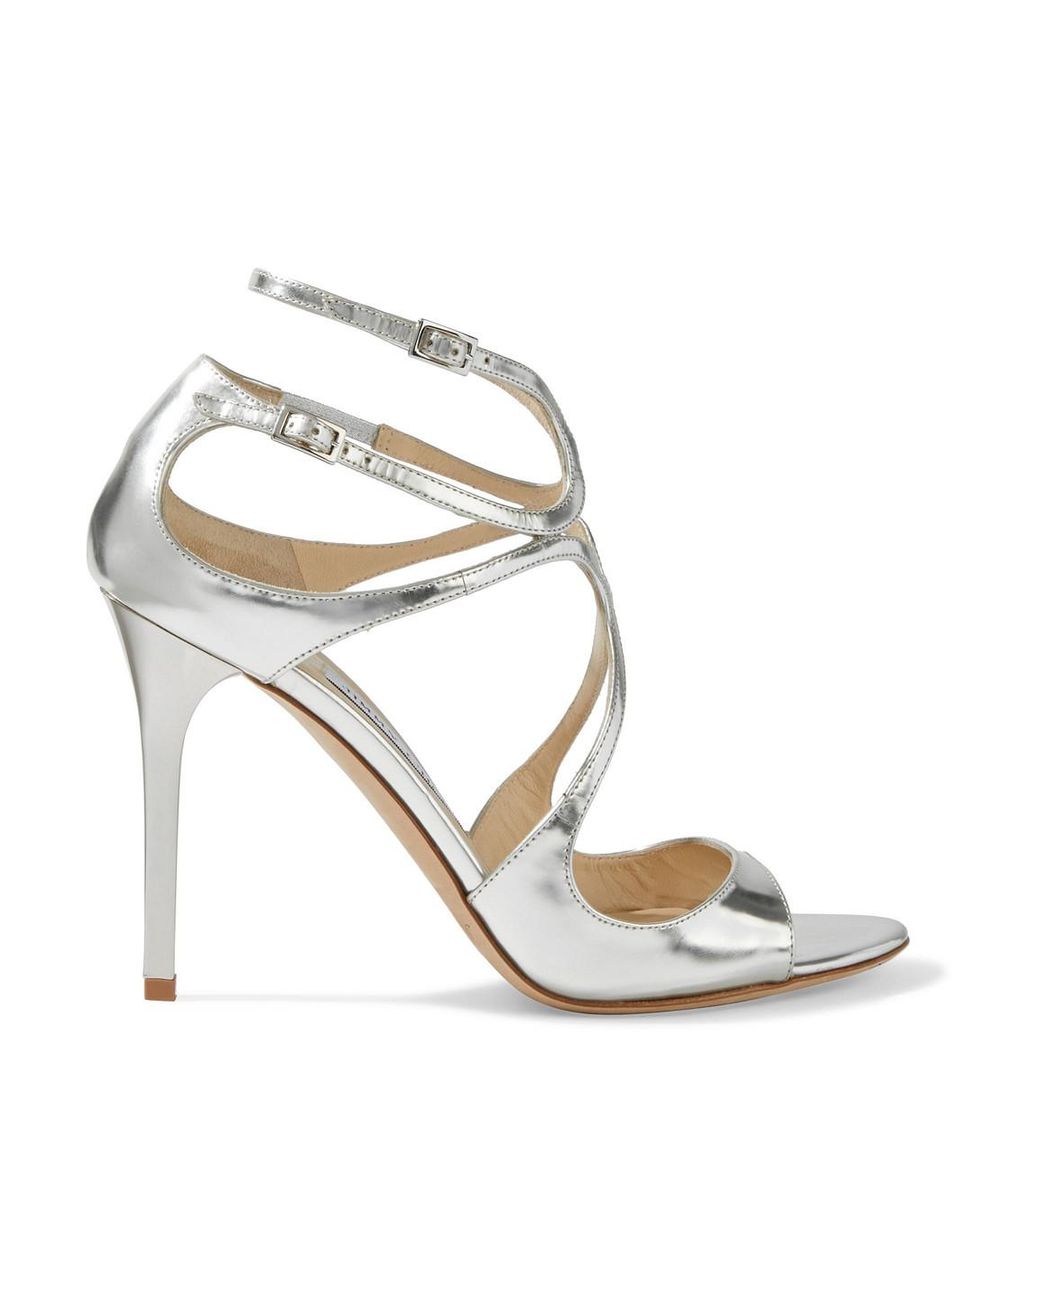 Jimmy Choo Lang 100 Mirrored-leather Sandals in Silver (Metallic) - Lyst